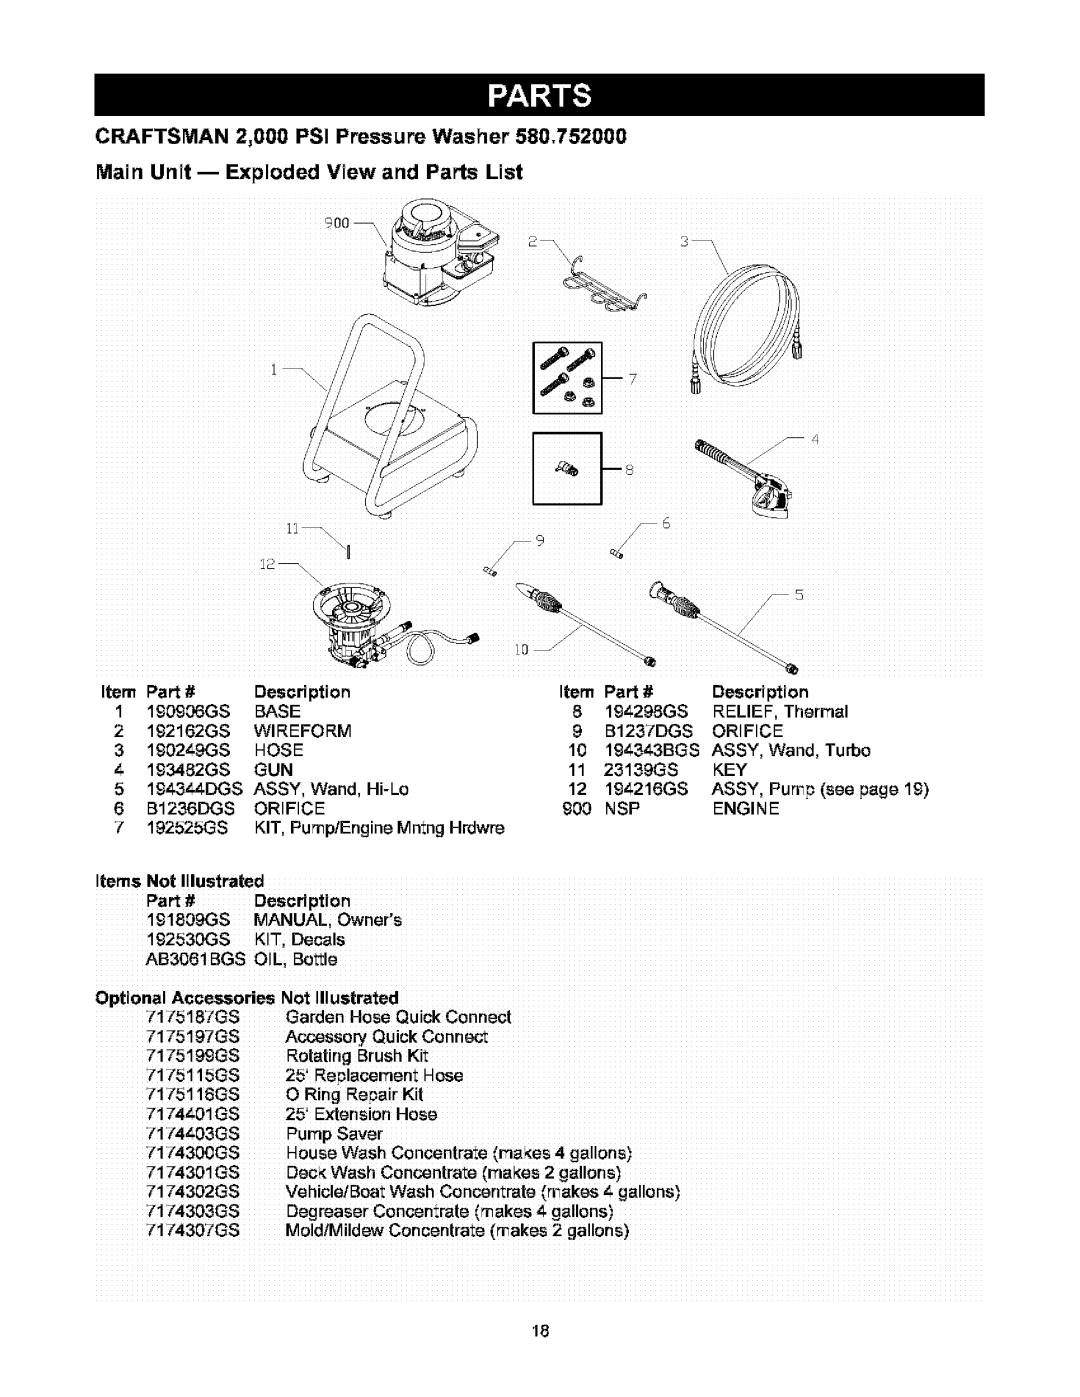 Craftsman 580.752 CRAFTSMAN 2,000 PSI Pressure Washer, Main Unit -- Exploded View and Parts List, 7174403G$, 7t74300GS 